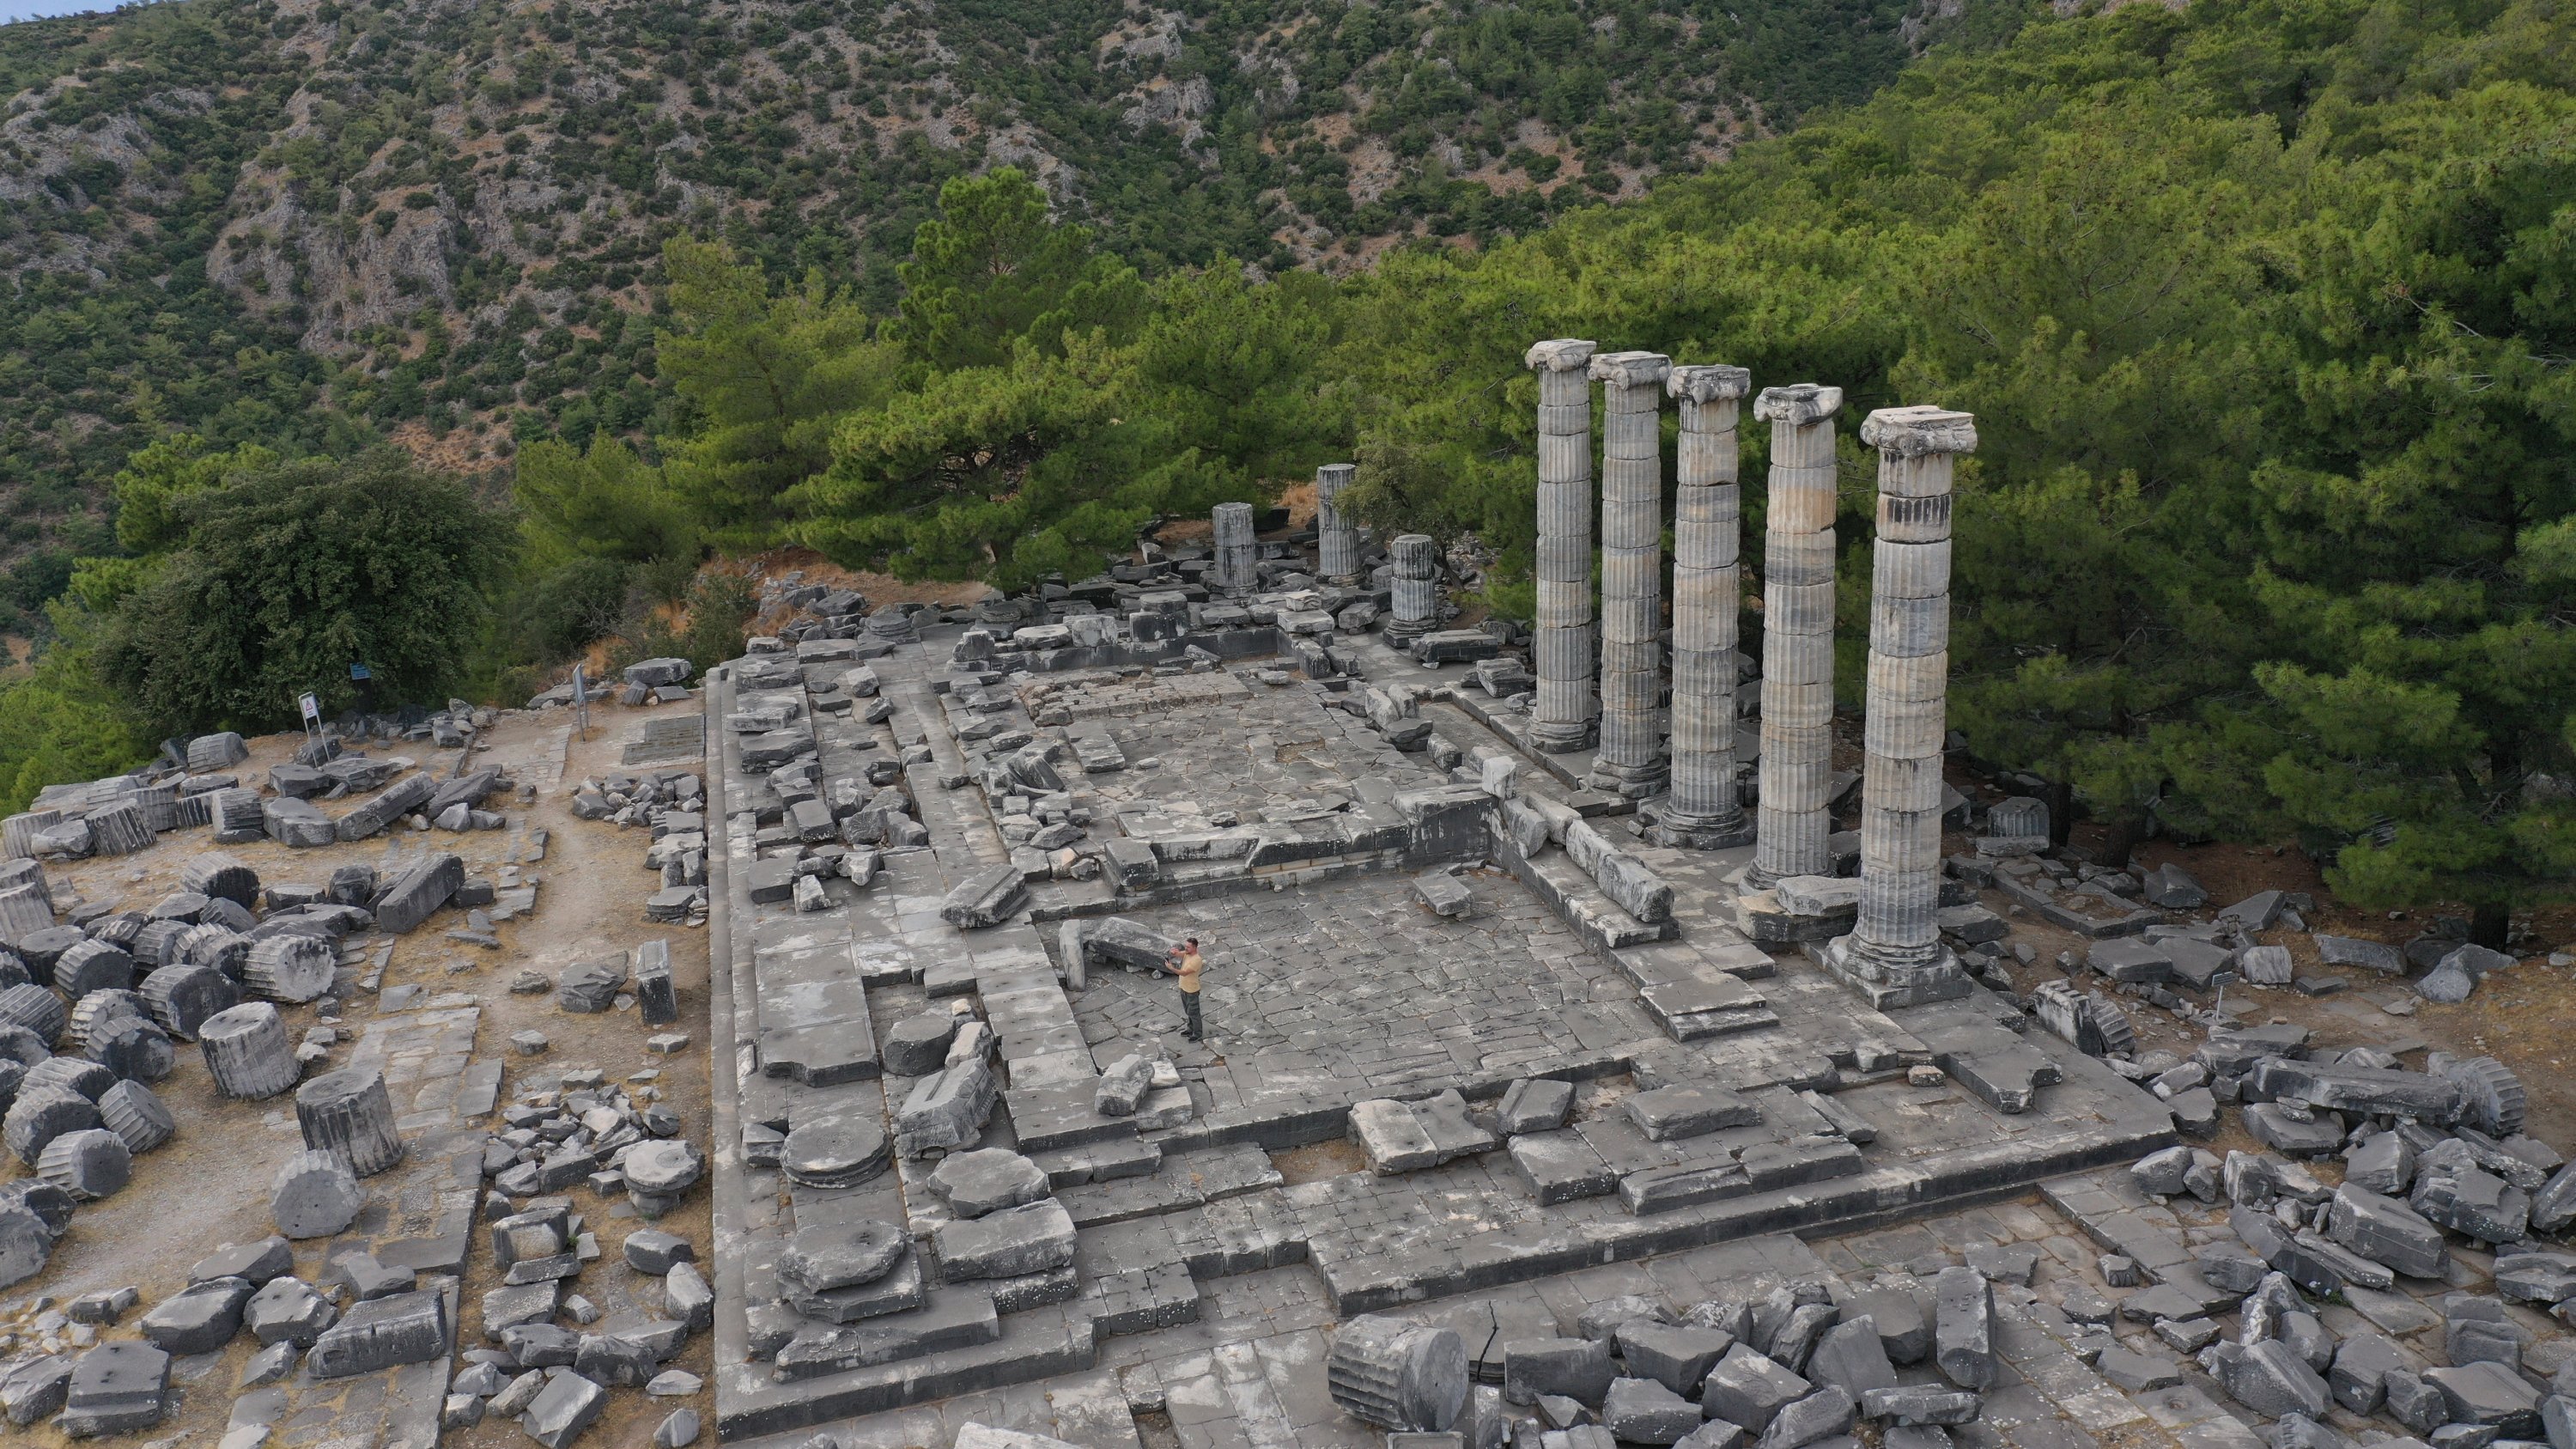 The ancient city of Priene is included on the UNESCO Temporary World Heritage List. (AA Photo)